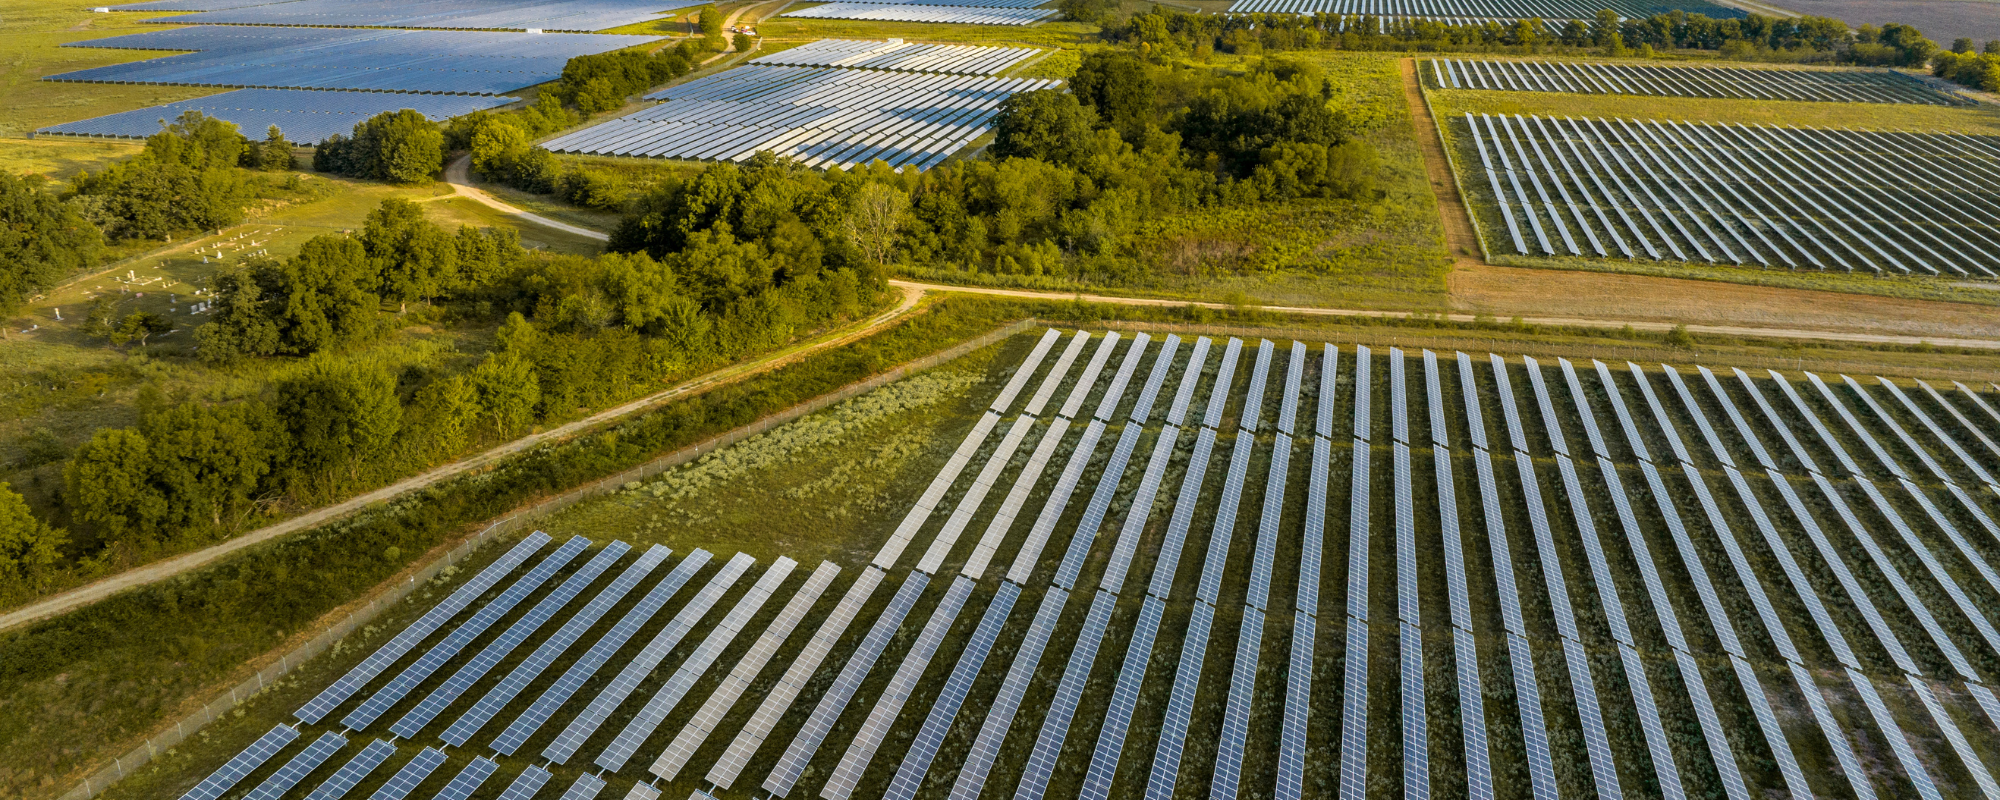 Solar panels in field with trees